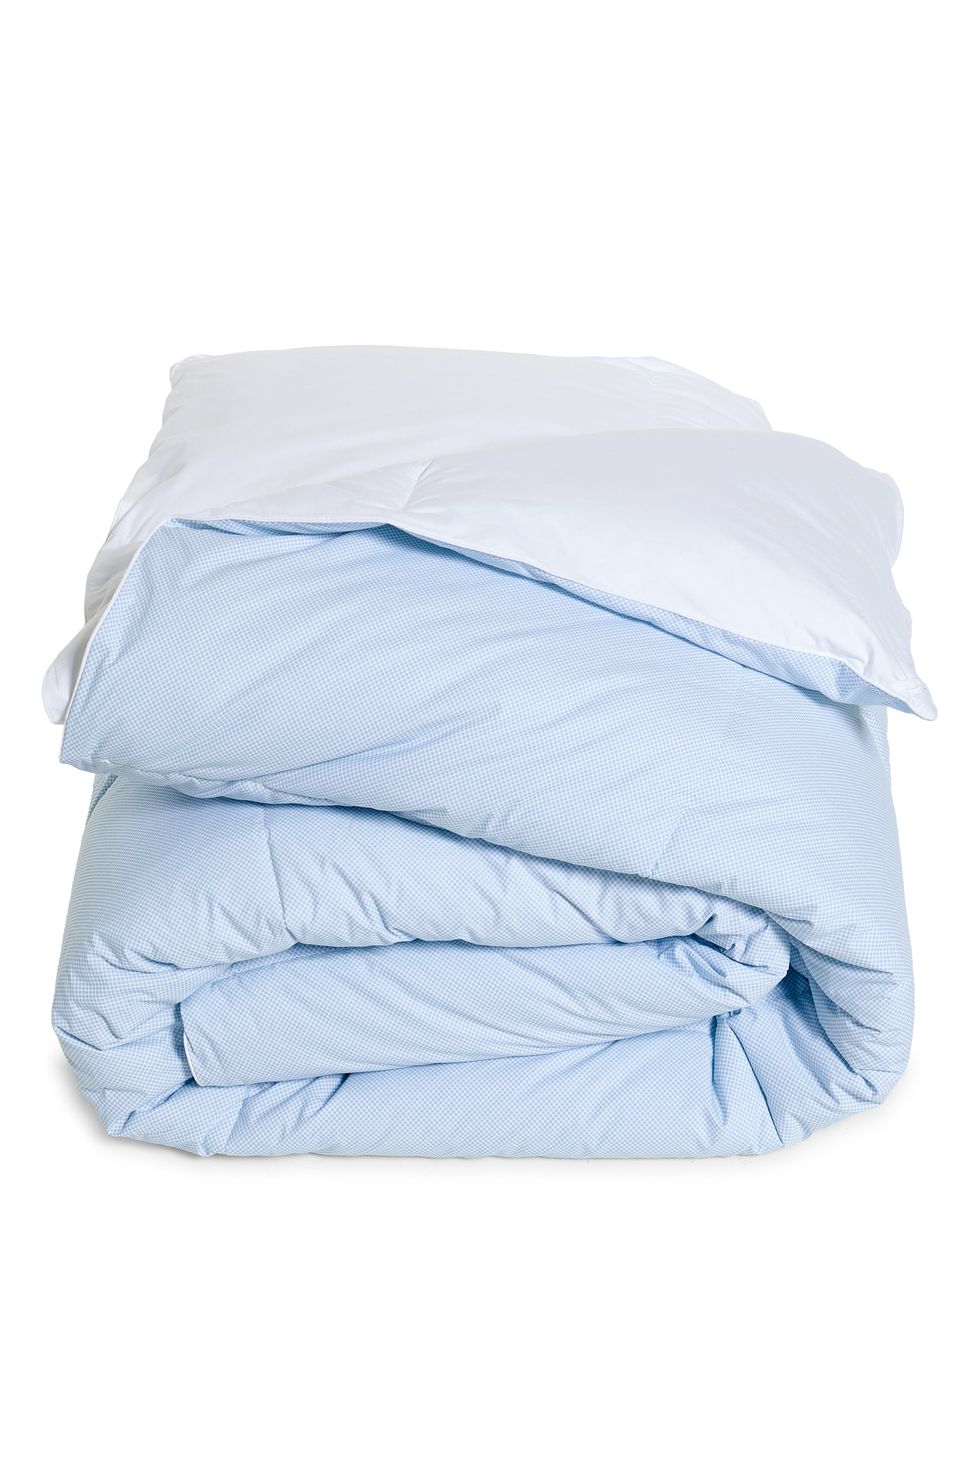 Cotton Cooling Comforter